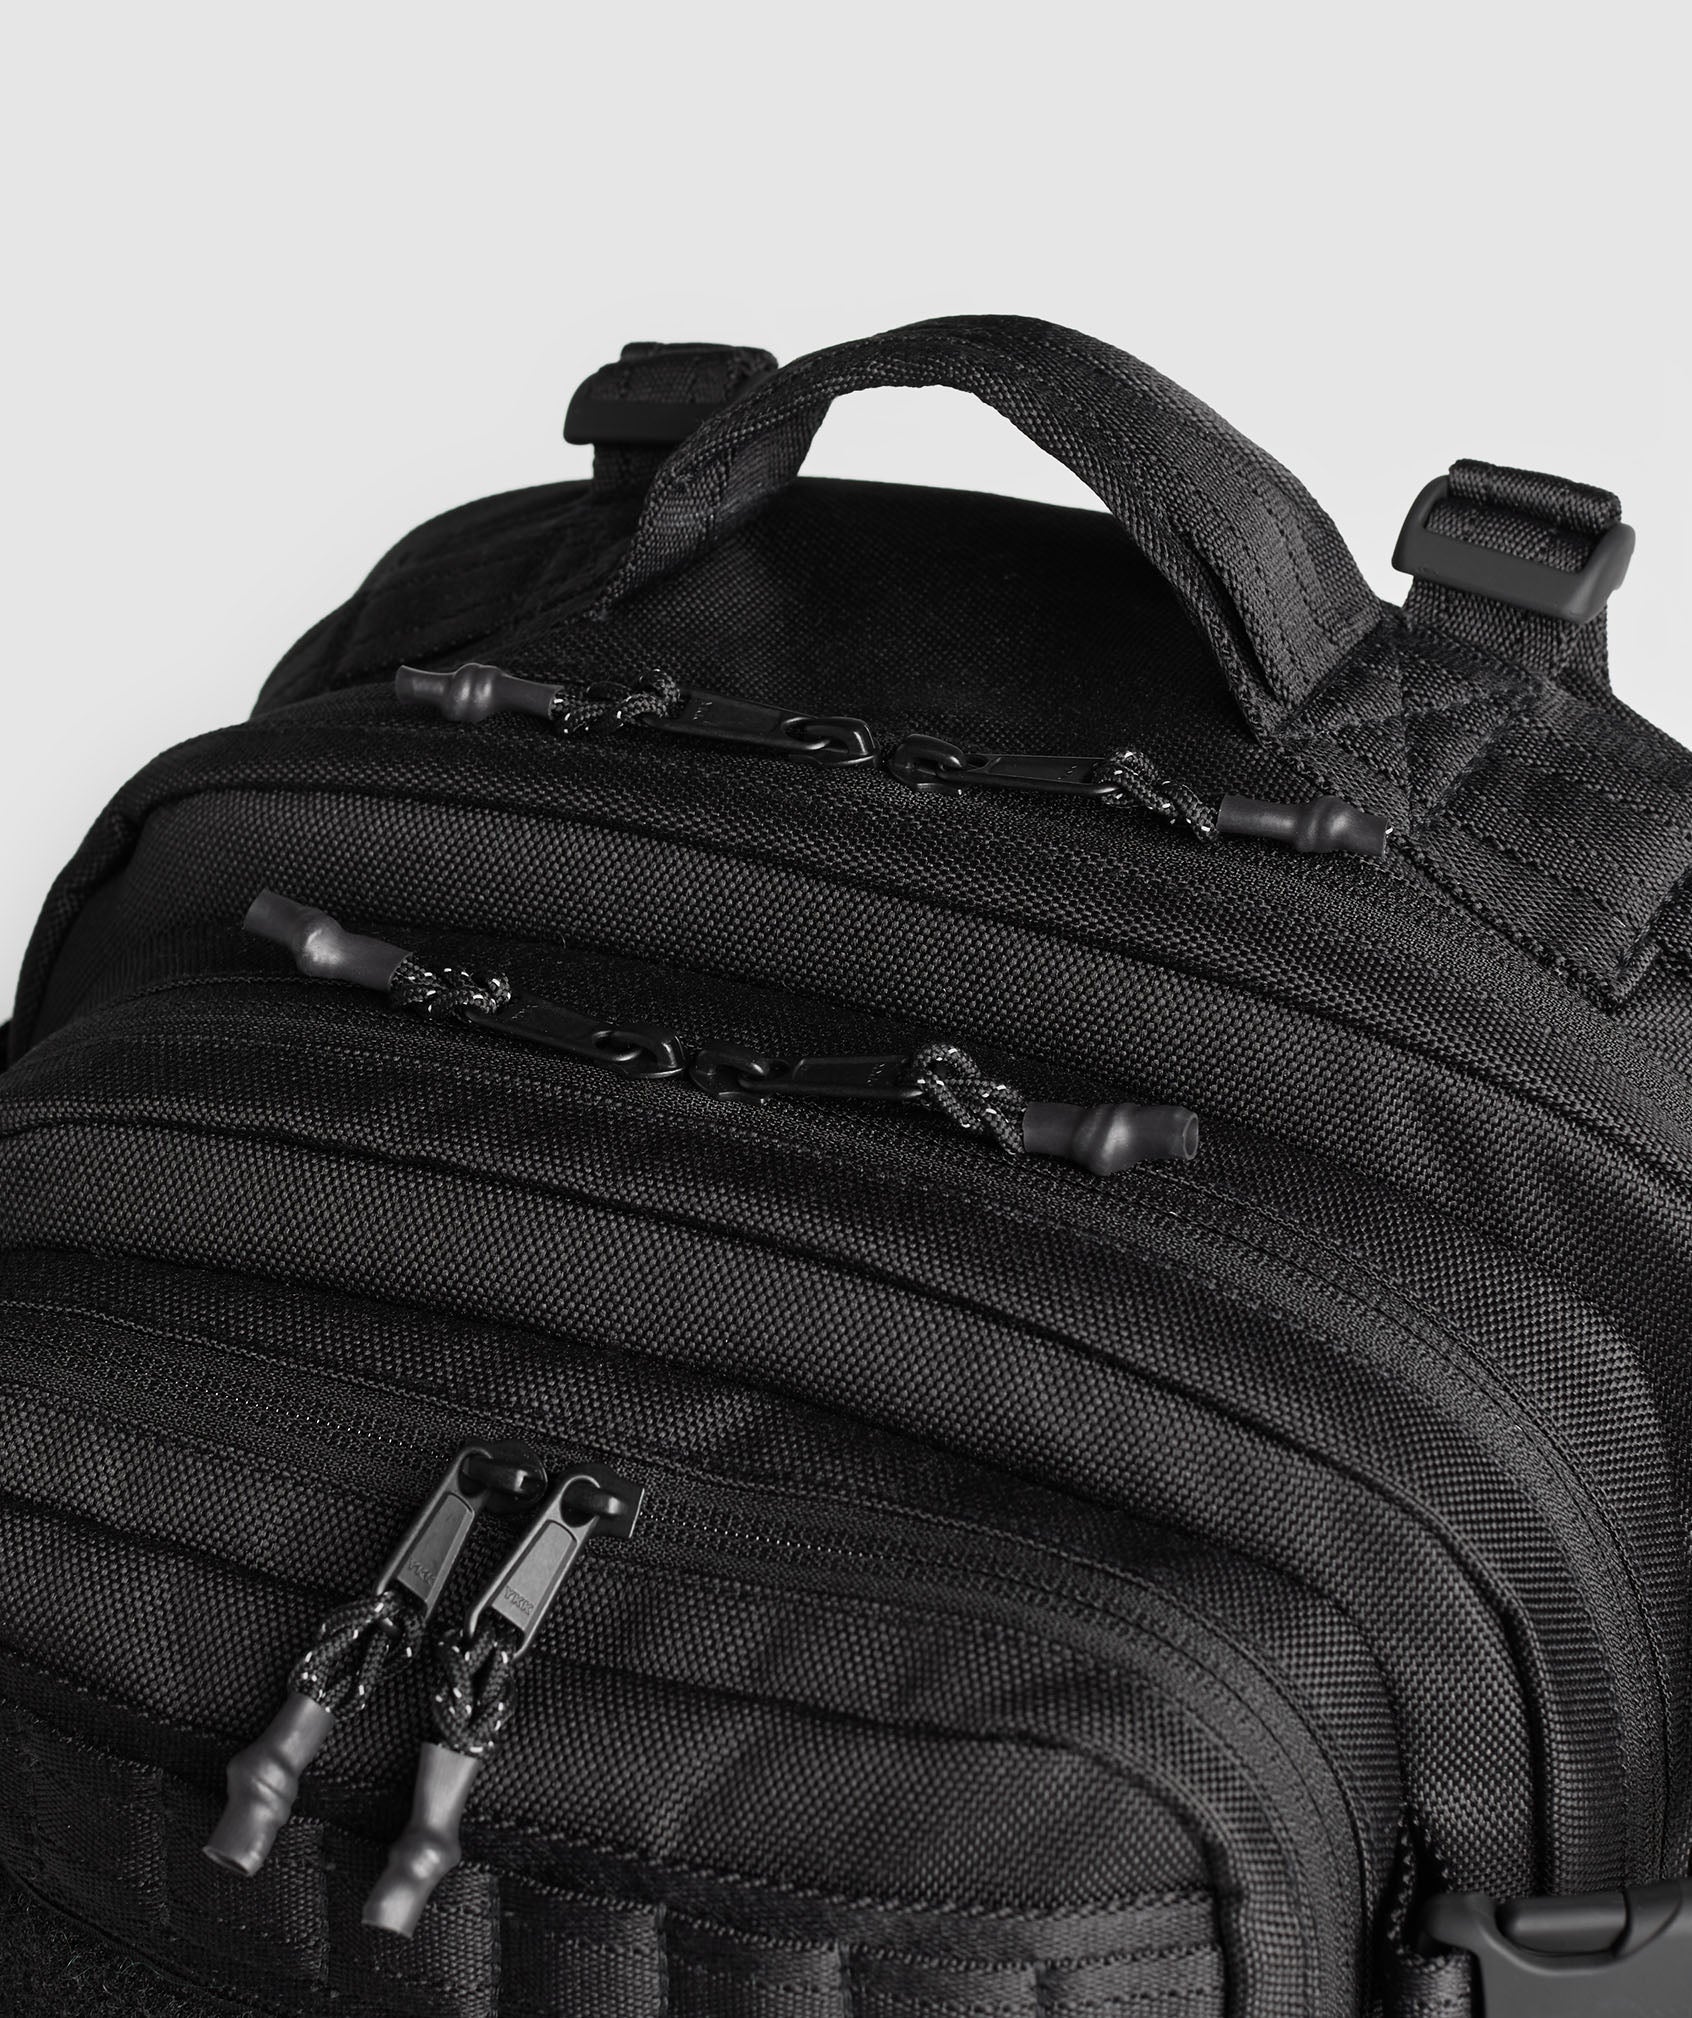 Tactical Backpack in Black - view 8